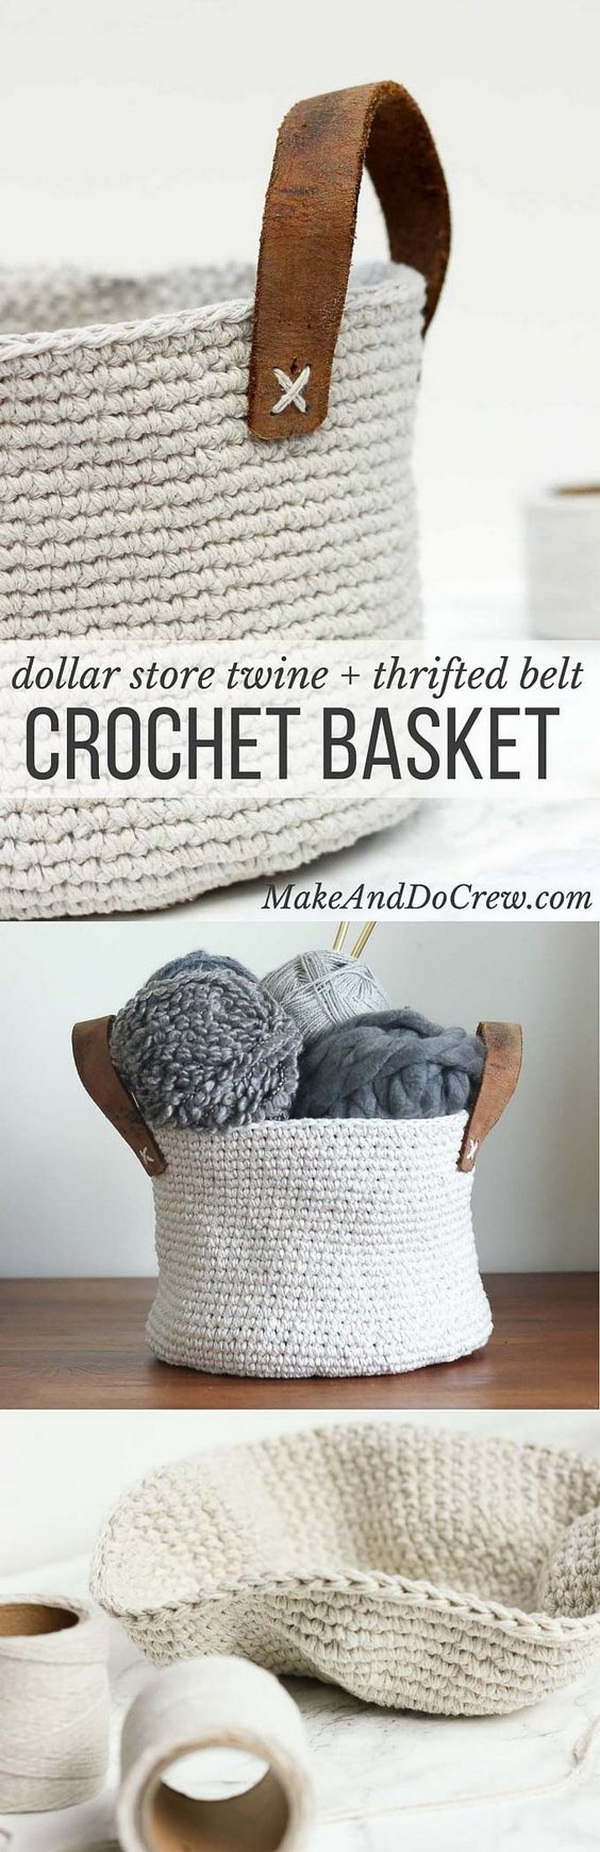 Crochet Storage Basket. Use inexpensive twine and leather to create a primitive, yet sophisticated home decor piece.